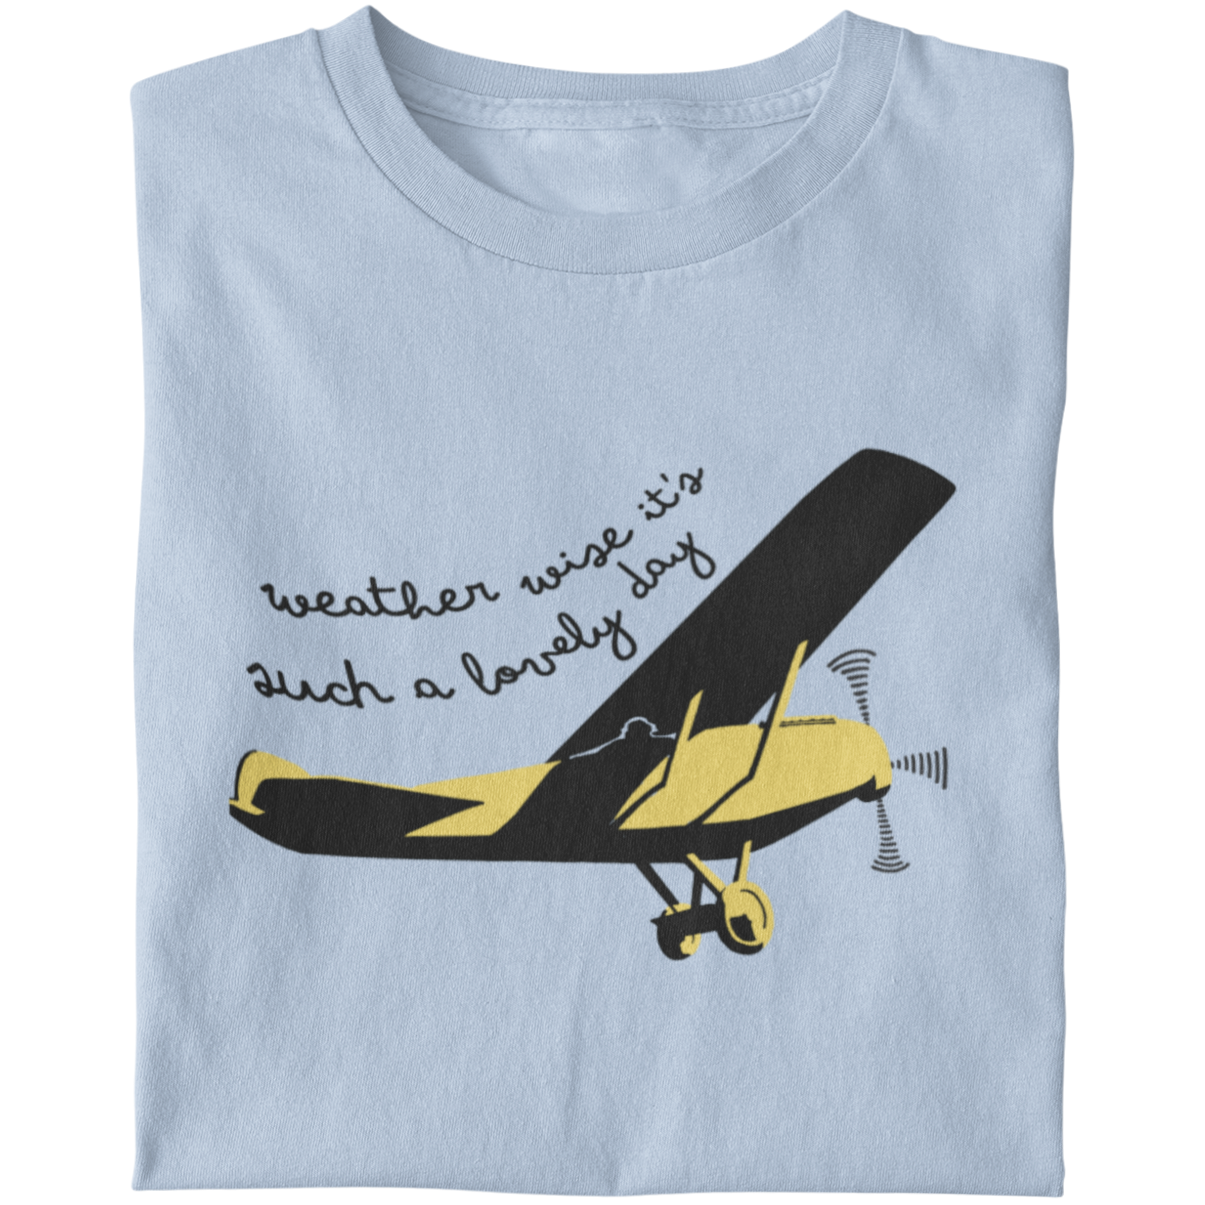 Come fly with me Sinatra airplane t shirt